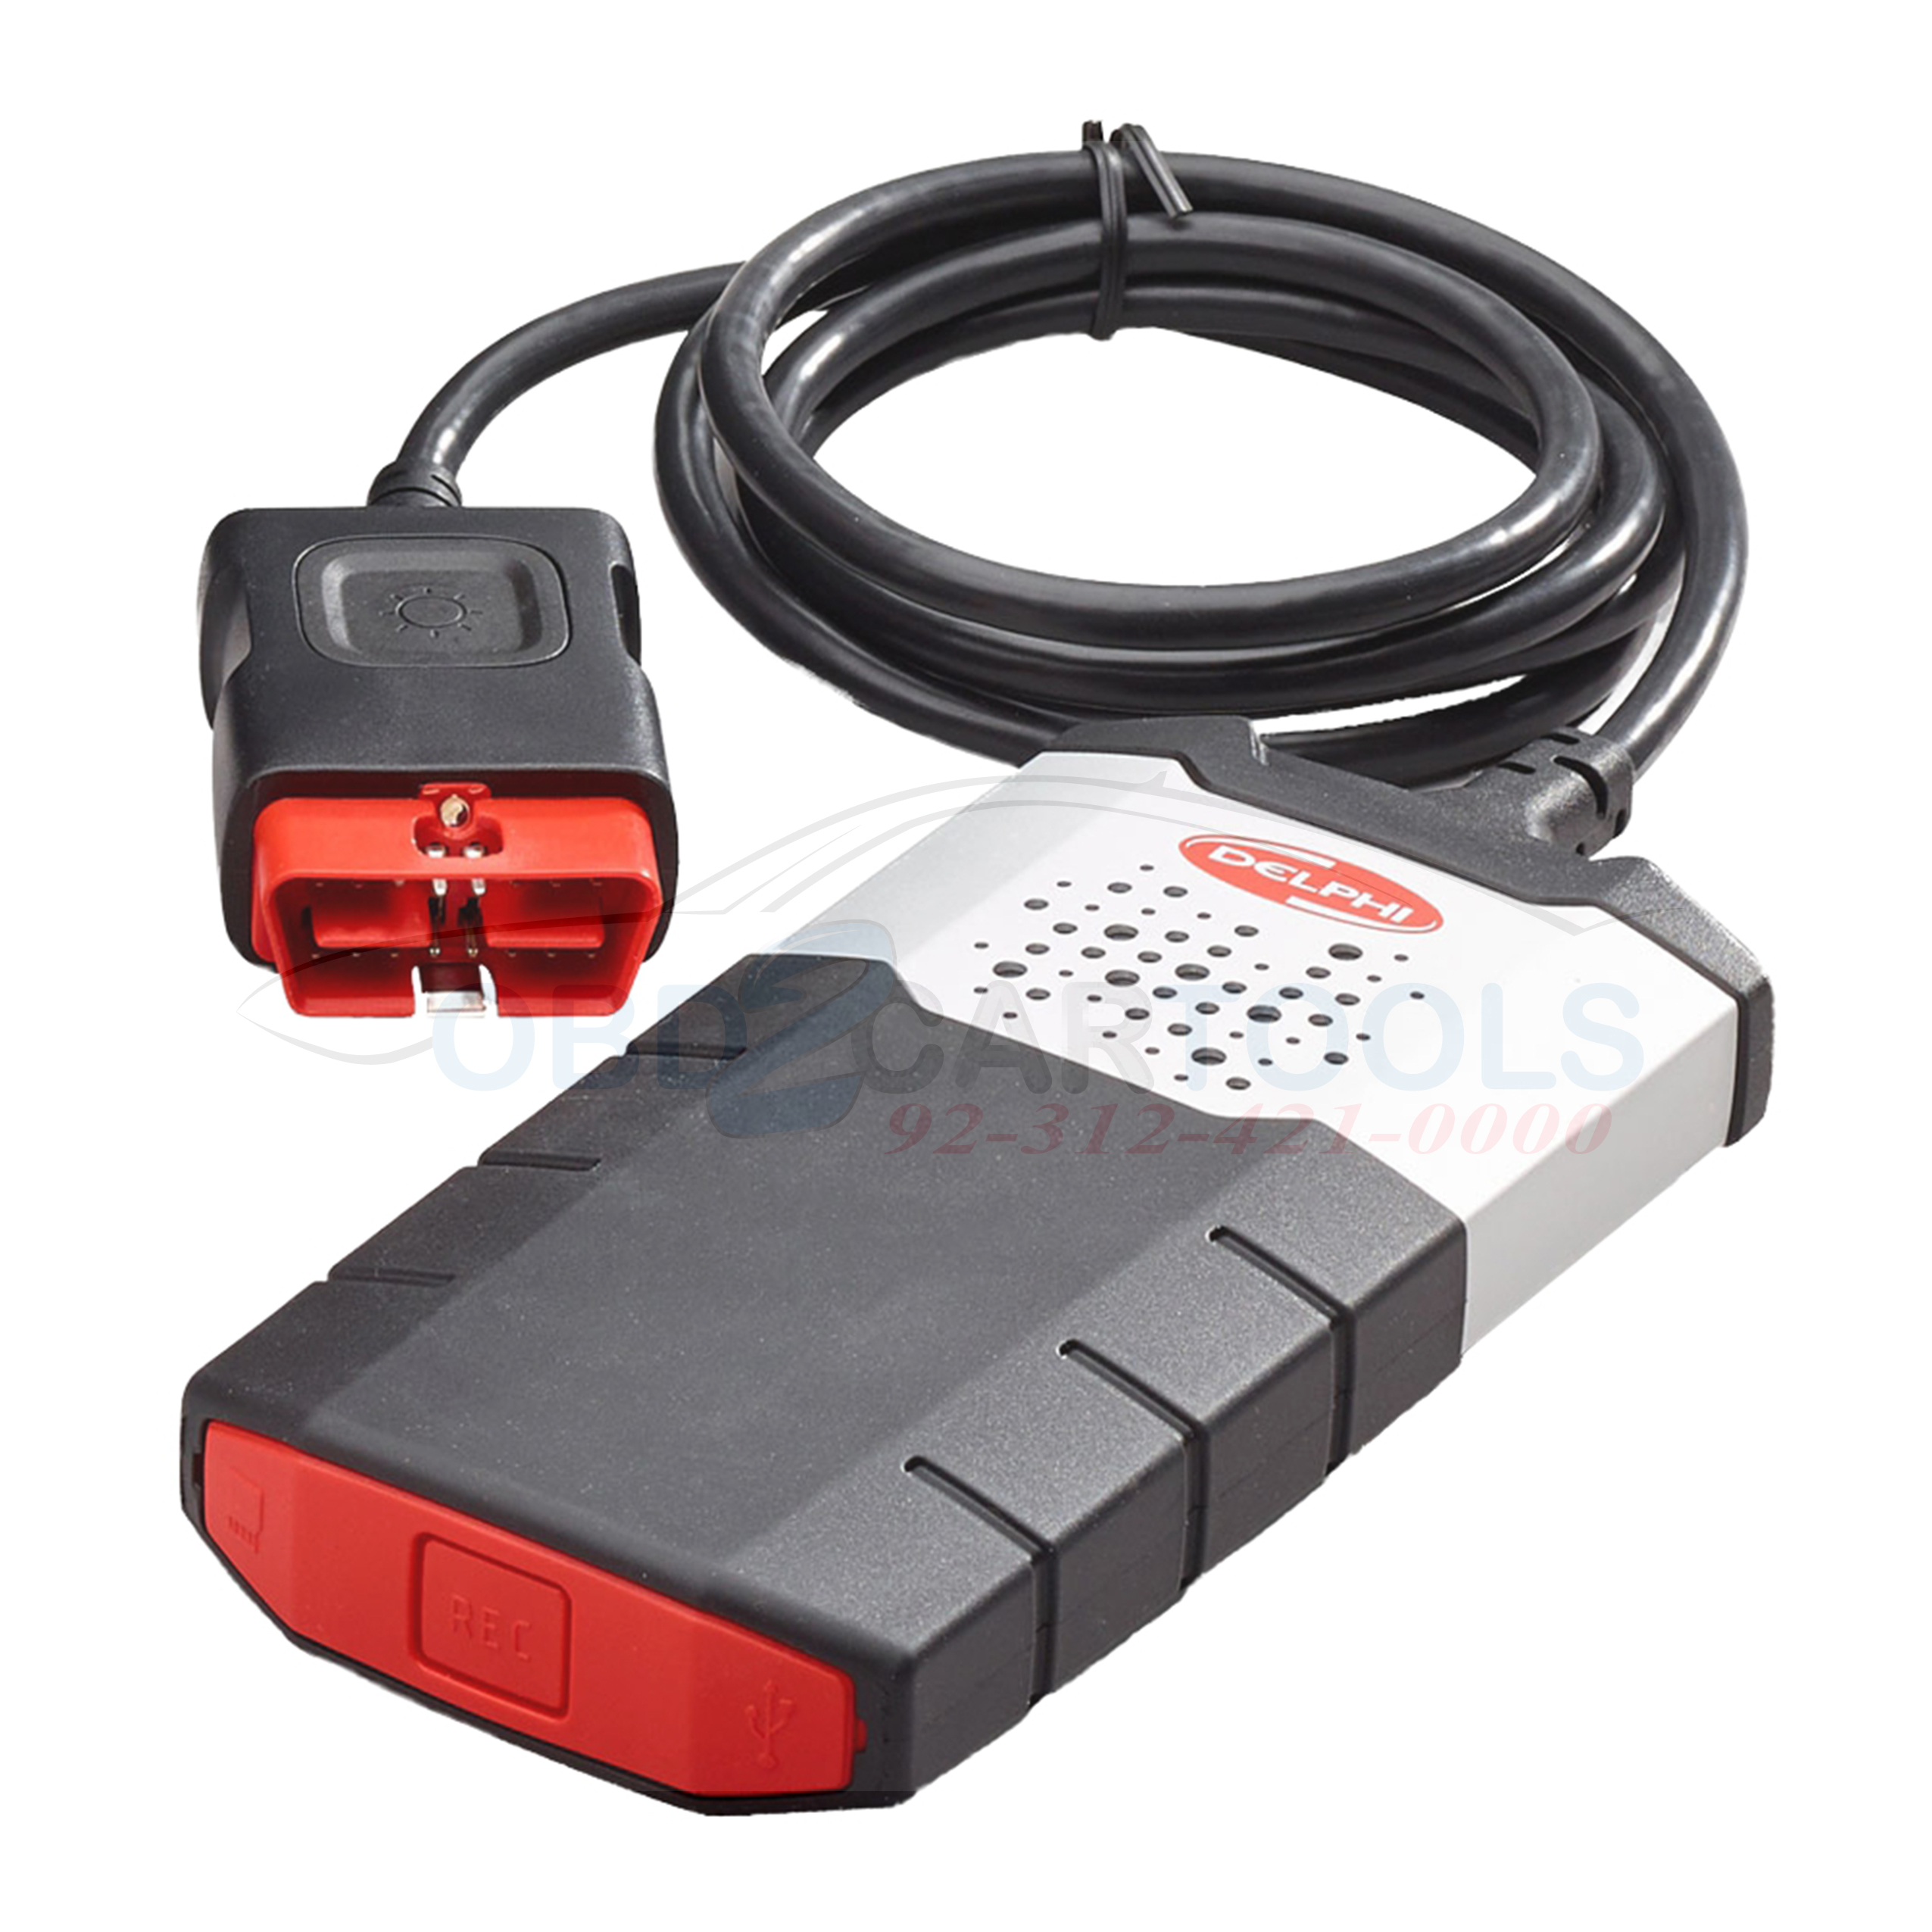 Product image for Delphi DS150 Diagnostic Tool with NEW VCI Bluetooth And Full Connector Set Car And Truck Scanner